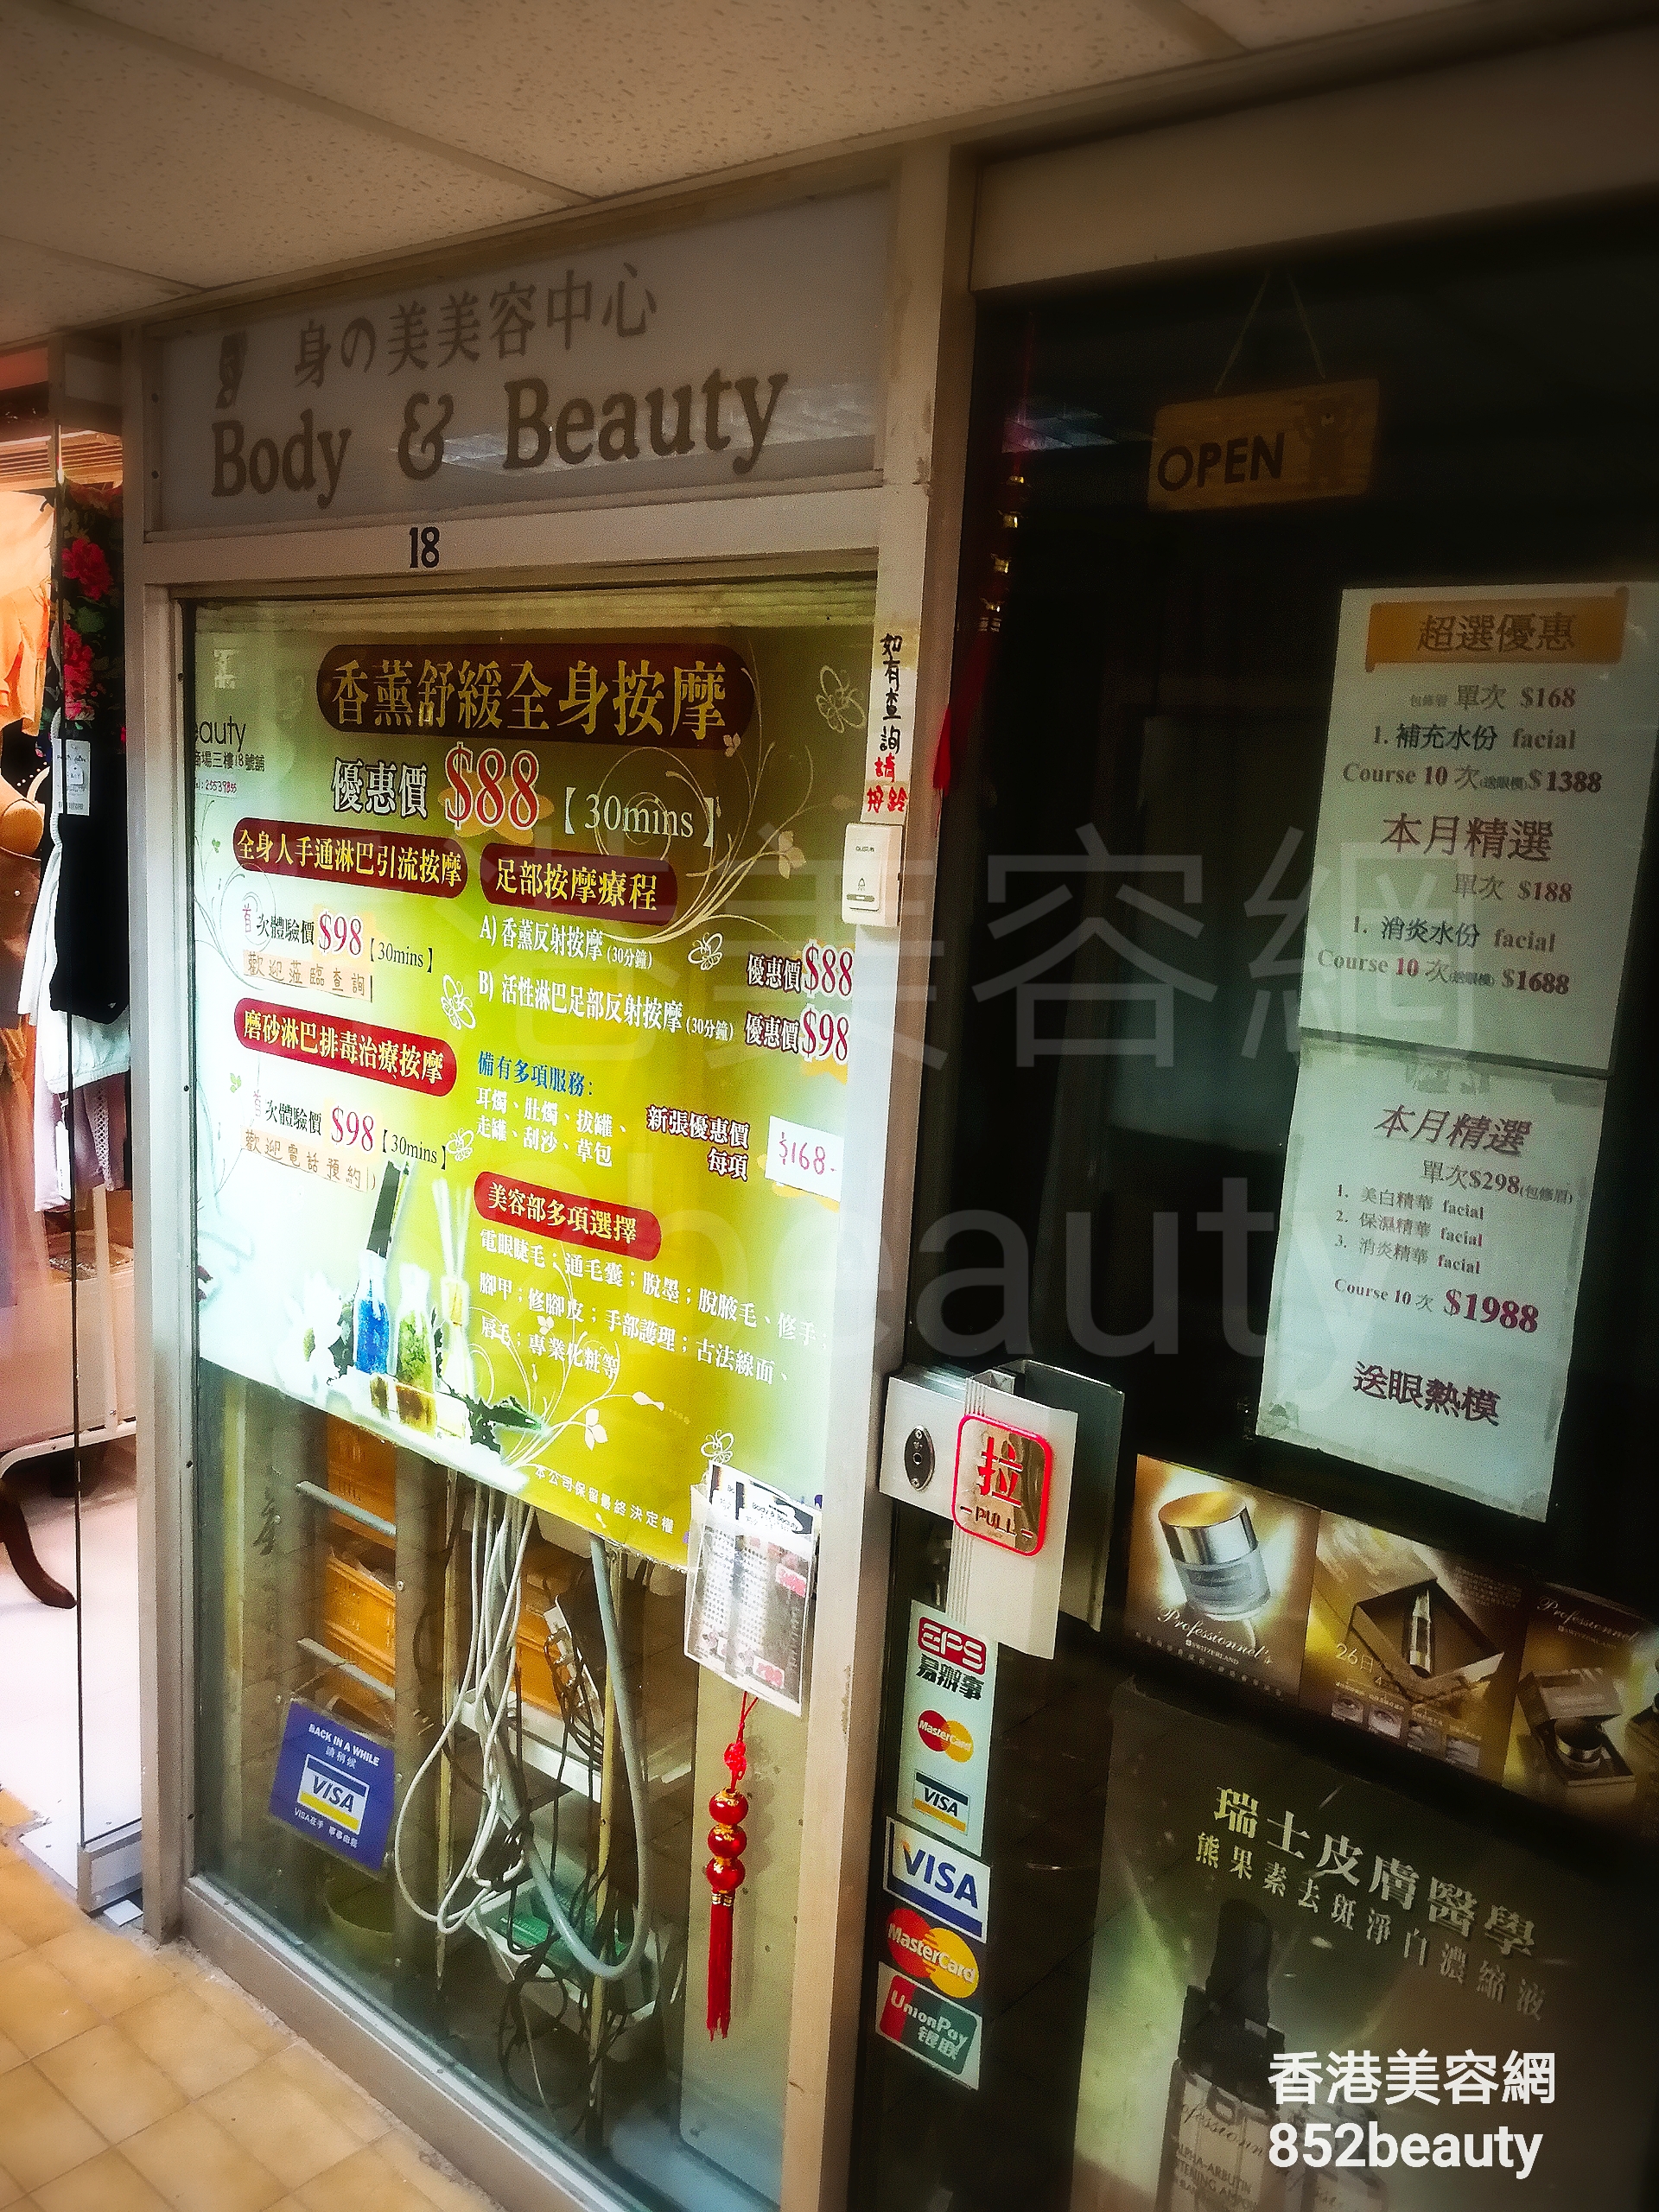 Hand and foot care: 身の美美容中心 Body & Beauty